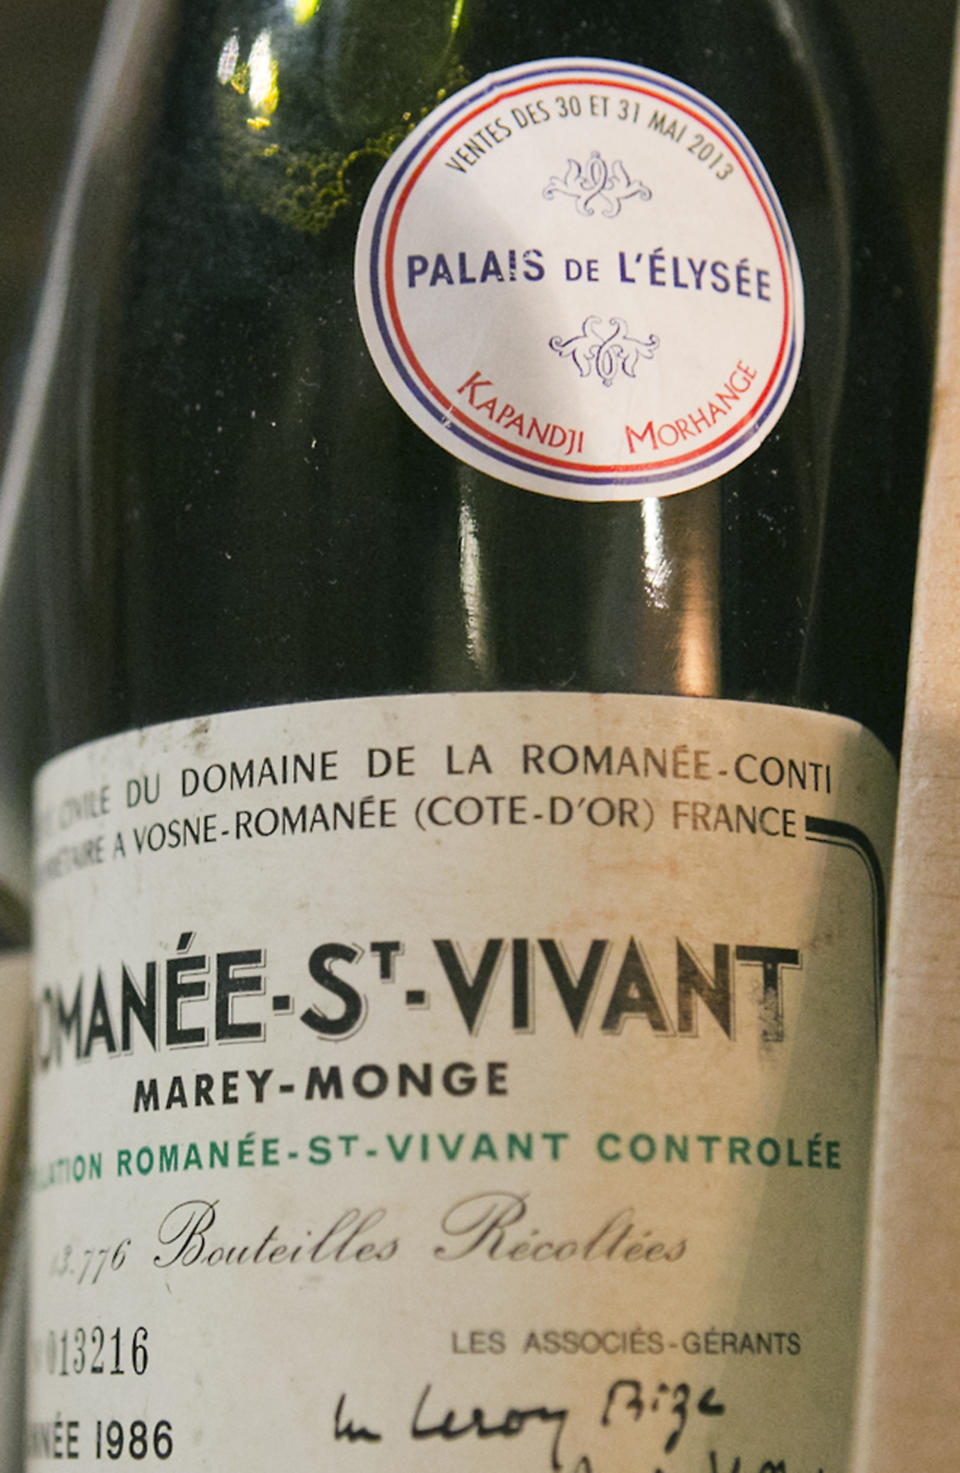 In this photo dated Tuesday May 28, 2013, a bottle of Romanee Saint Vivant 1986 put on auction by the French presidential Palace is pictured during an auction preview in Issy les Moulineaux, south of Paris, France. French President Francois Hollande’s palace has decided to dive into its wine cellar and sell some of its treasures, to raise money and replenish its collection with more modest vintages. About 1,200 bottles, a tenth of the Elysee’s wine collection, are to be sold at Drouot auction house in Paris on Thursday and Friday. (AP Photo/Jacques Brinon)